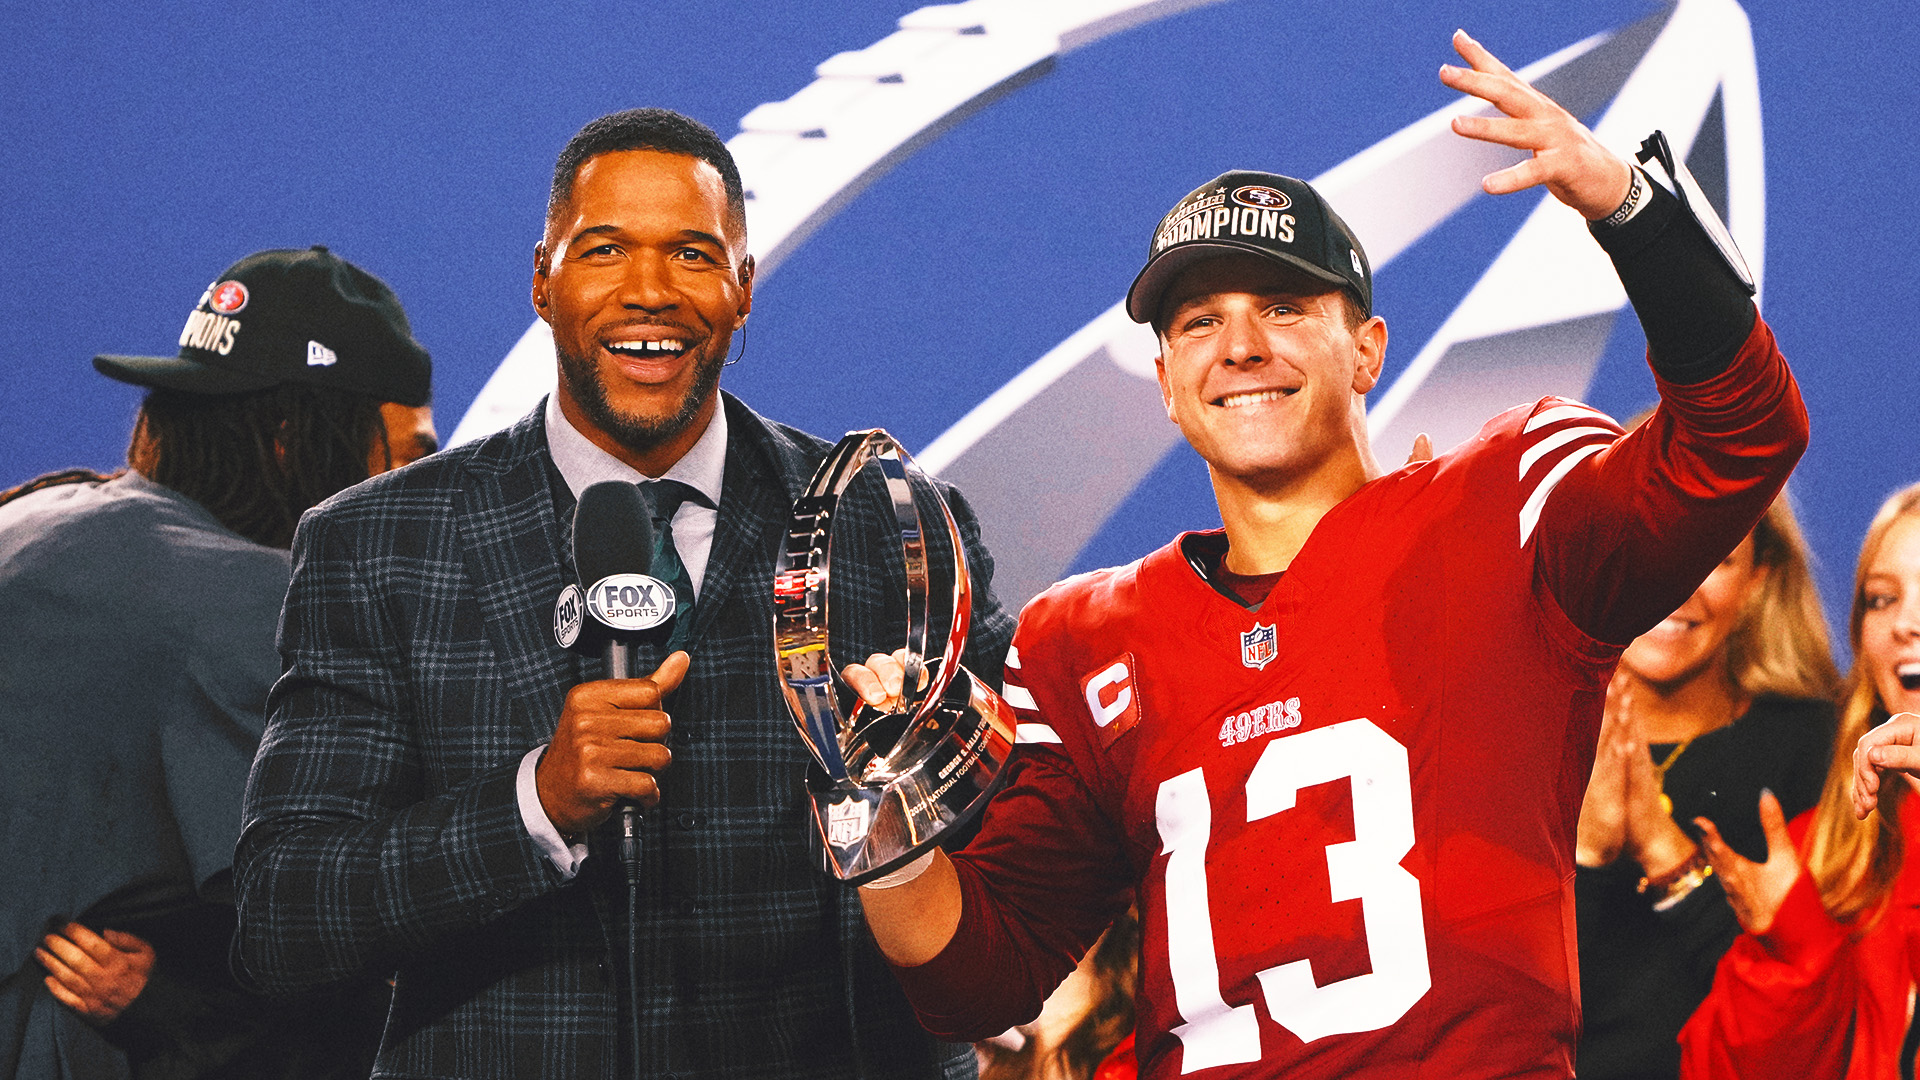 'Game manager' who? NFL fans react to 49ers, Brock Purdy's triumph in NFC Championship Game